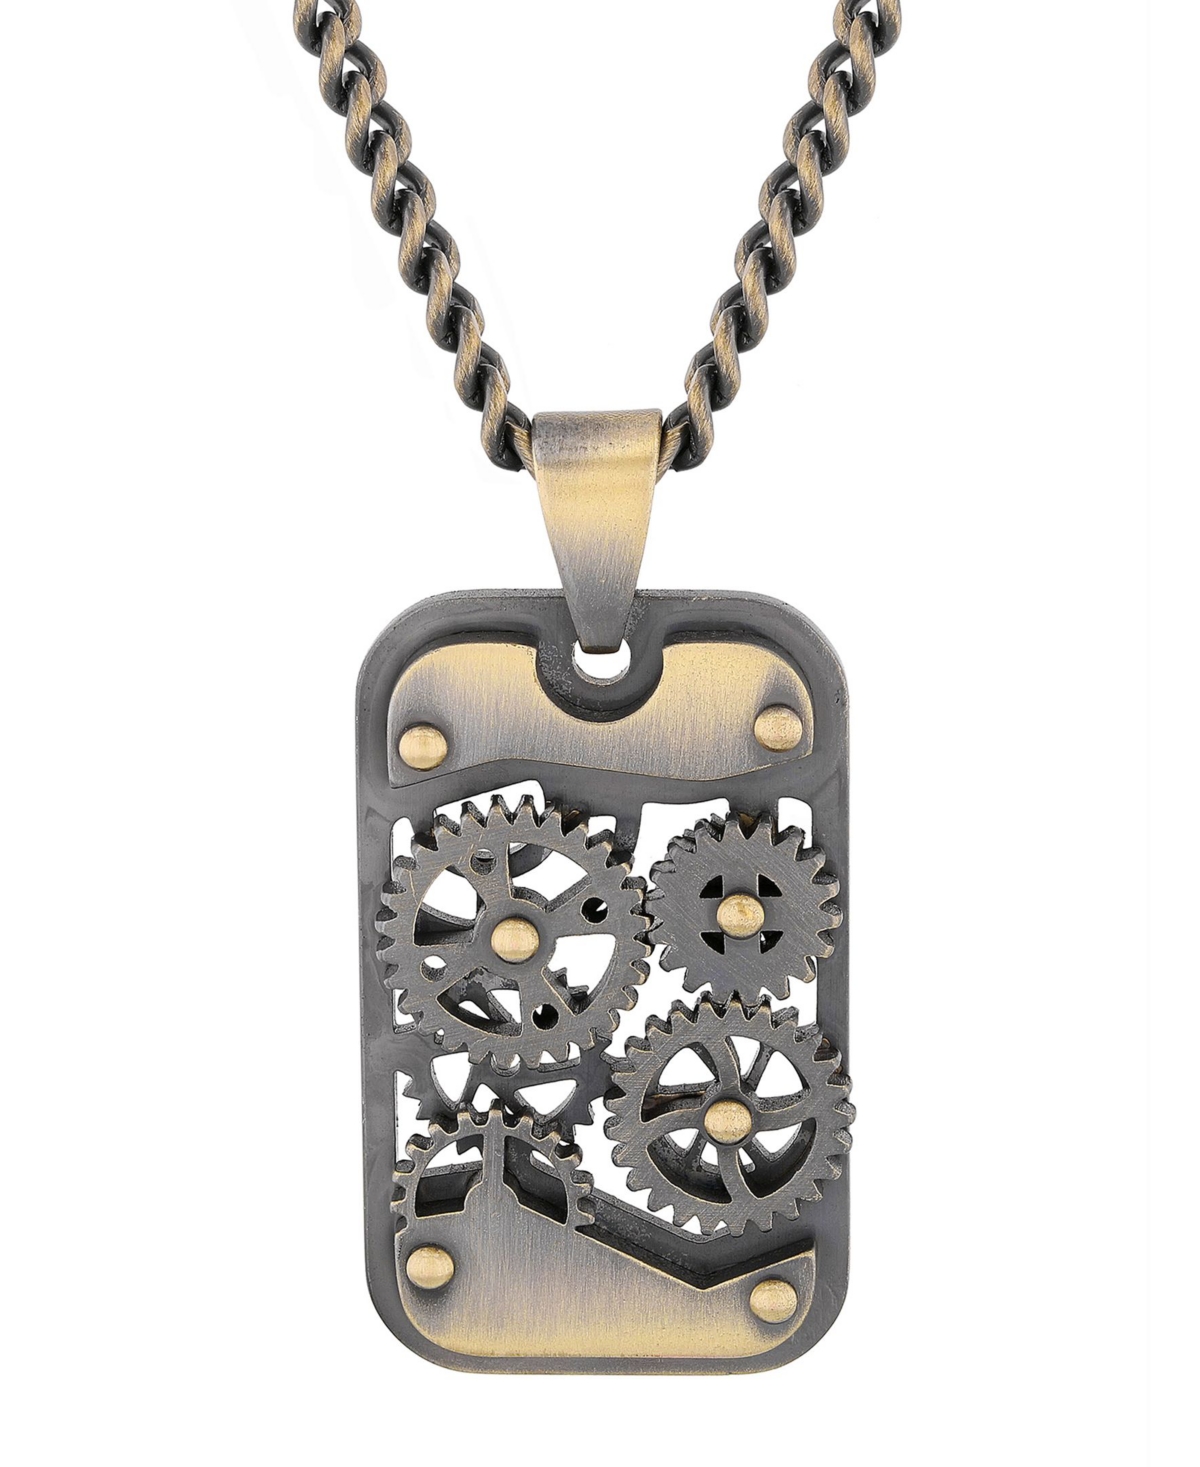 C & c Jewelry Men's Movable Gear Dog Tag in Gunmetal Stainless Steel Pendant Necklace